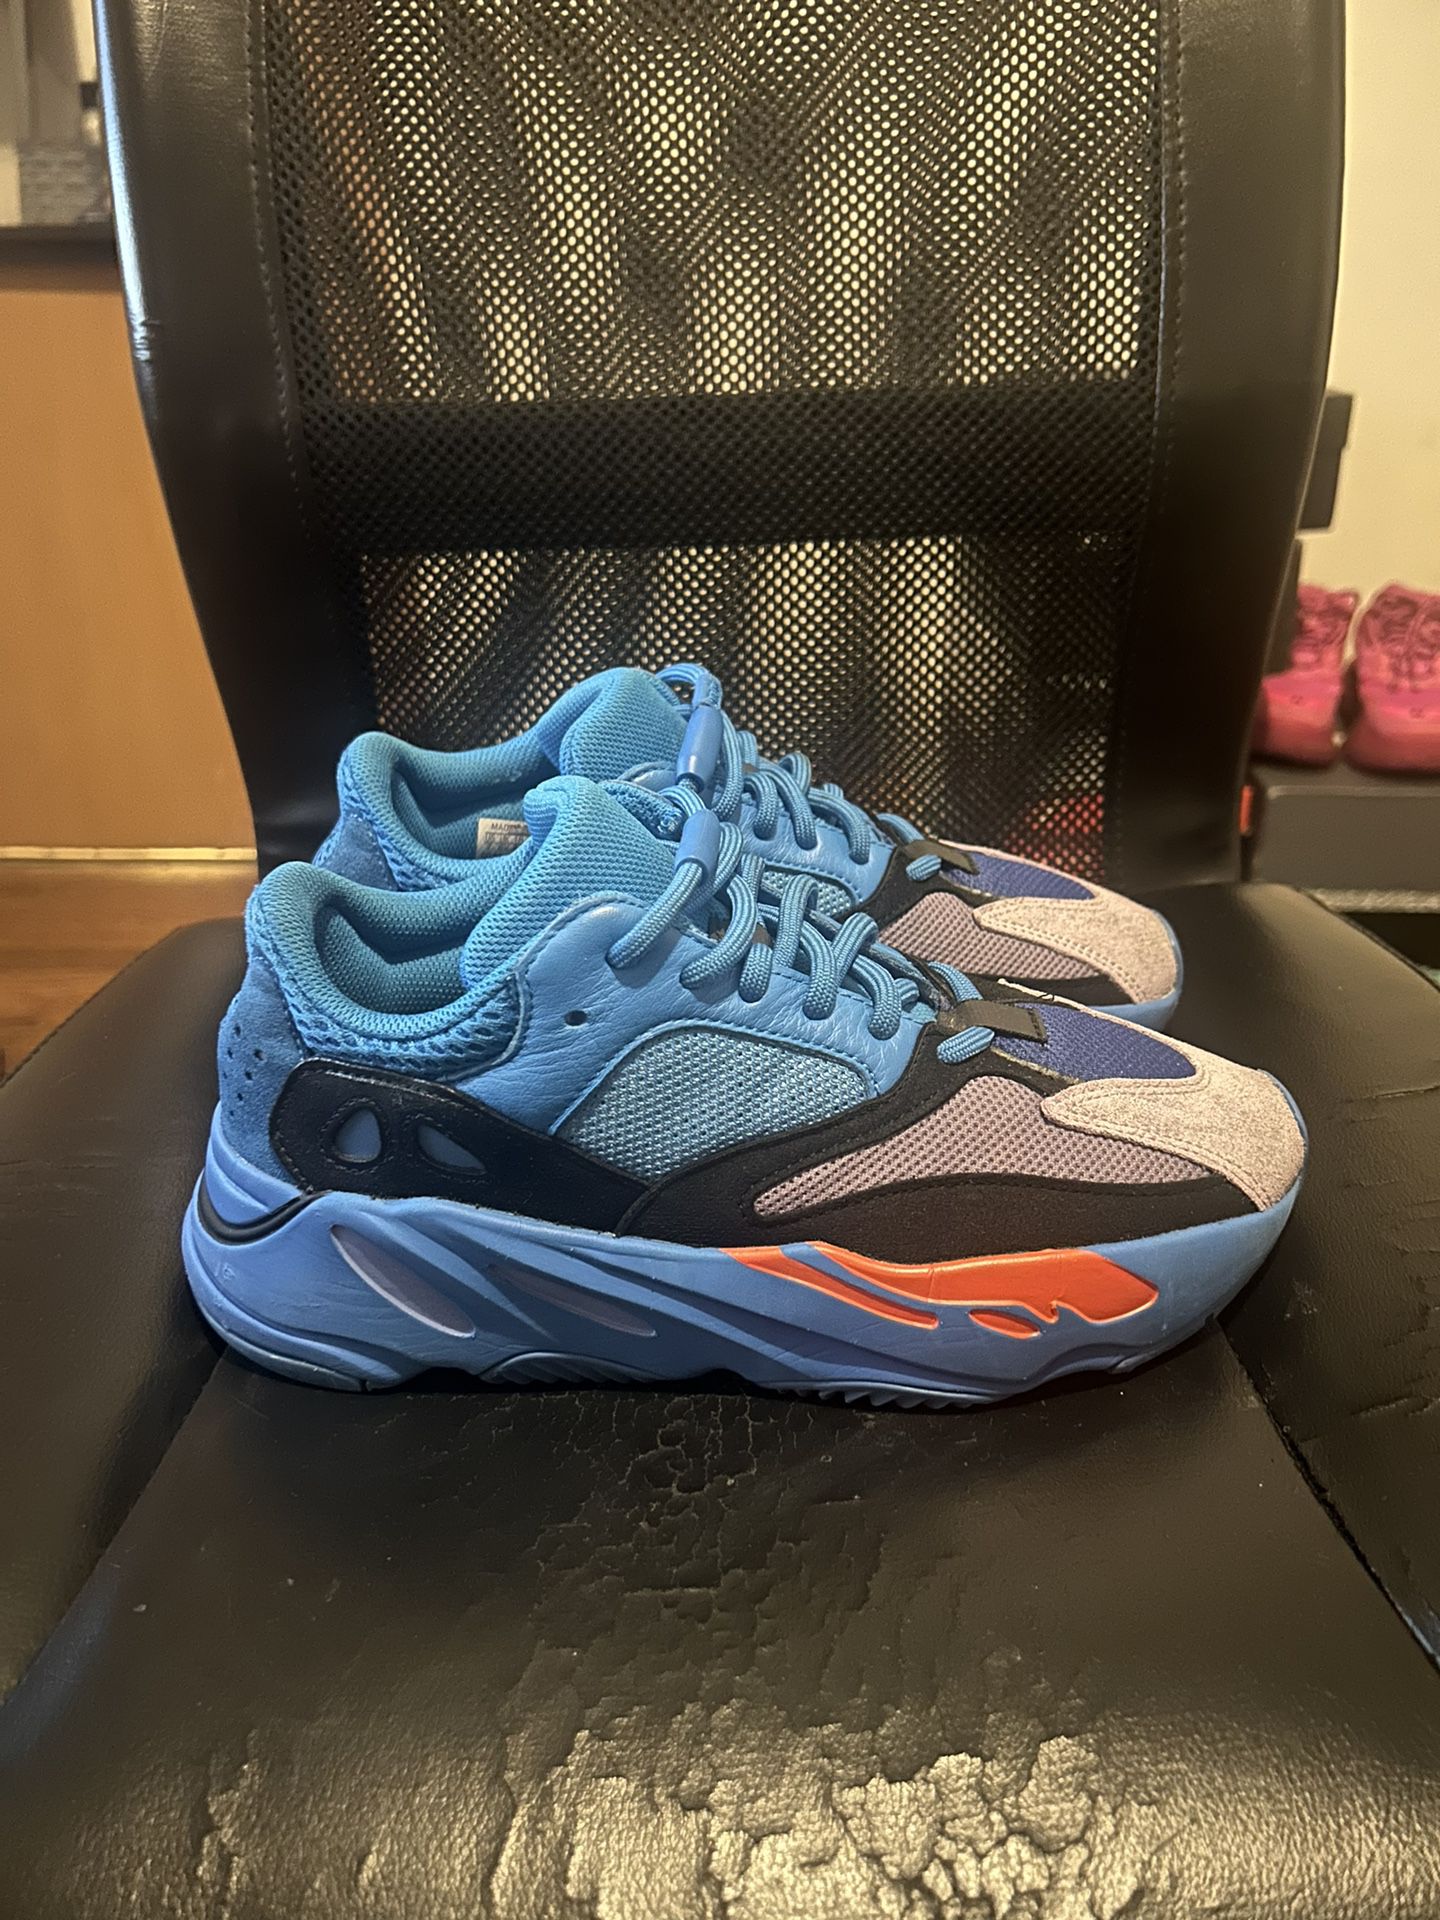 Yeezy Boost 700 Bright Blue’s